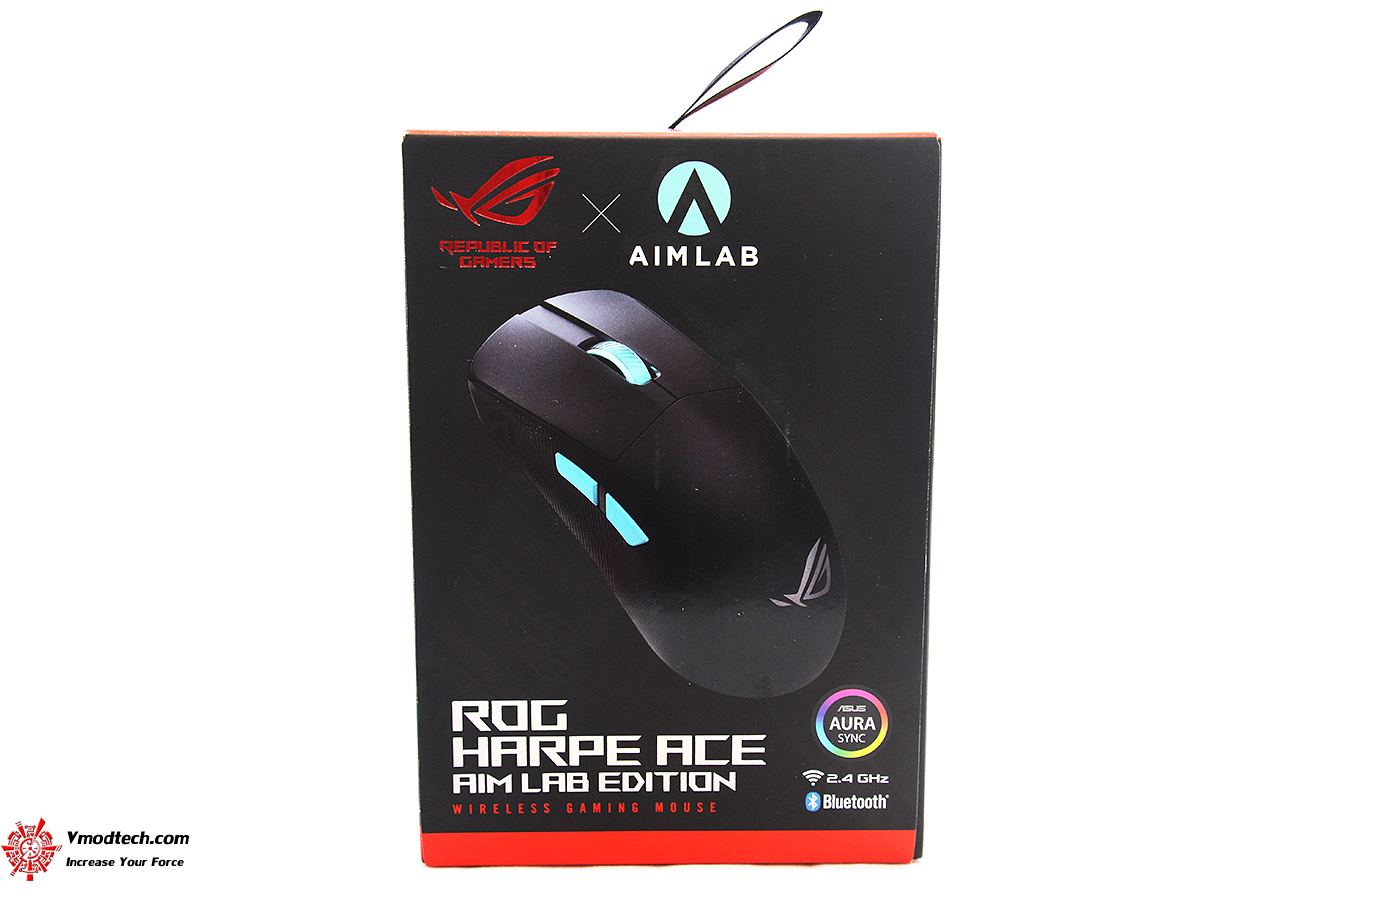 dsc 3768 ROG Harpe Ace Aim Lab Edition Wireless Gaming Mouse Review